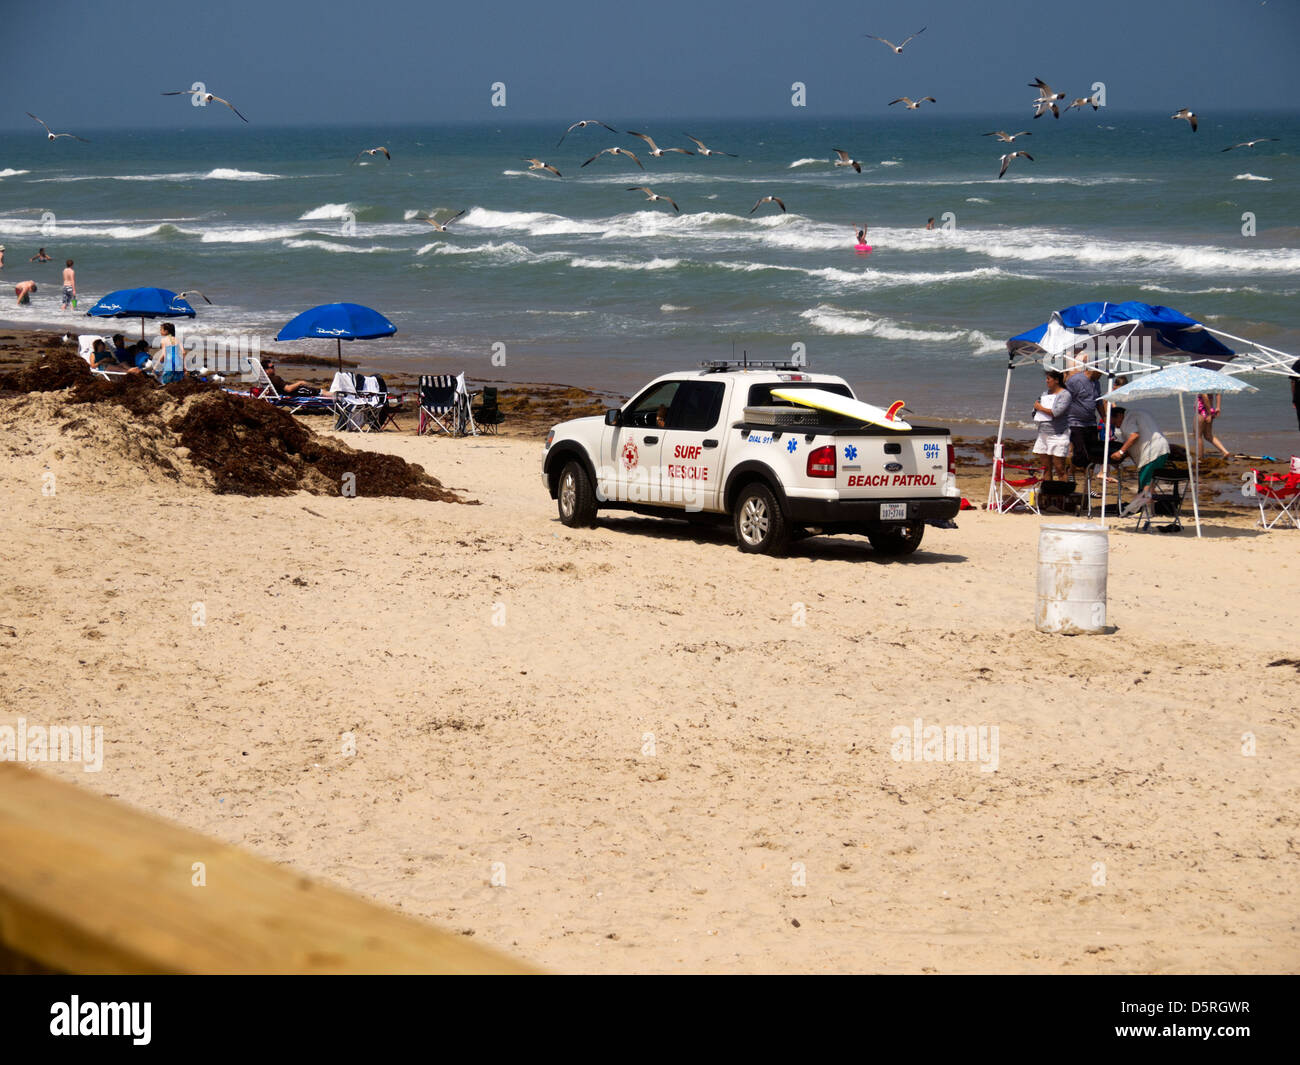 Beach Patrol at South Padre Island, Texas. Real people relaxing on the beach and swimming in the Gulf of Mexico. Stock Photo